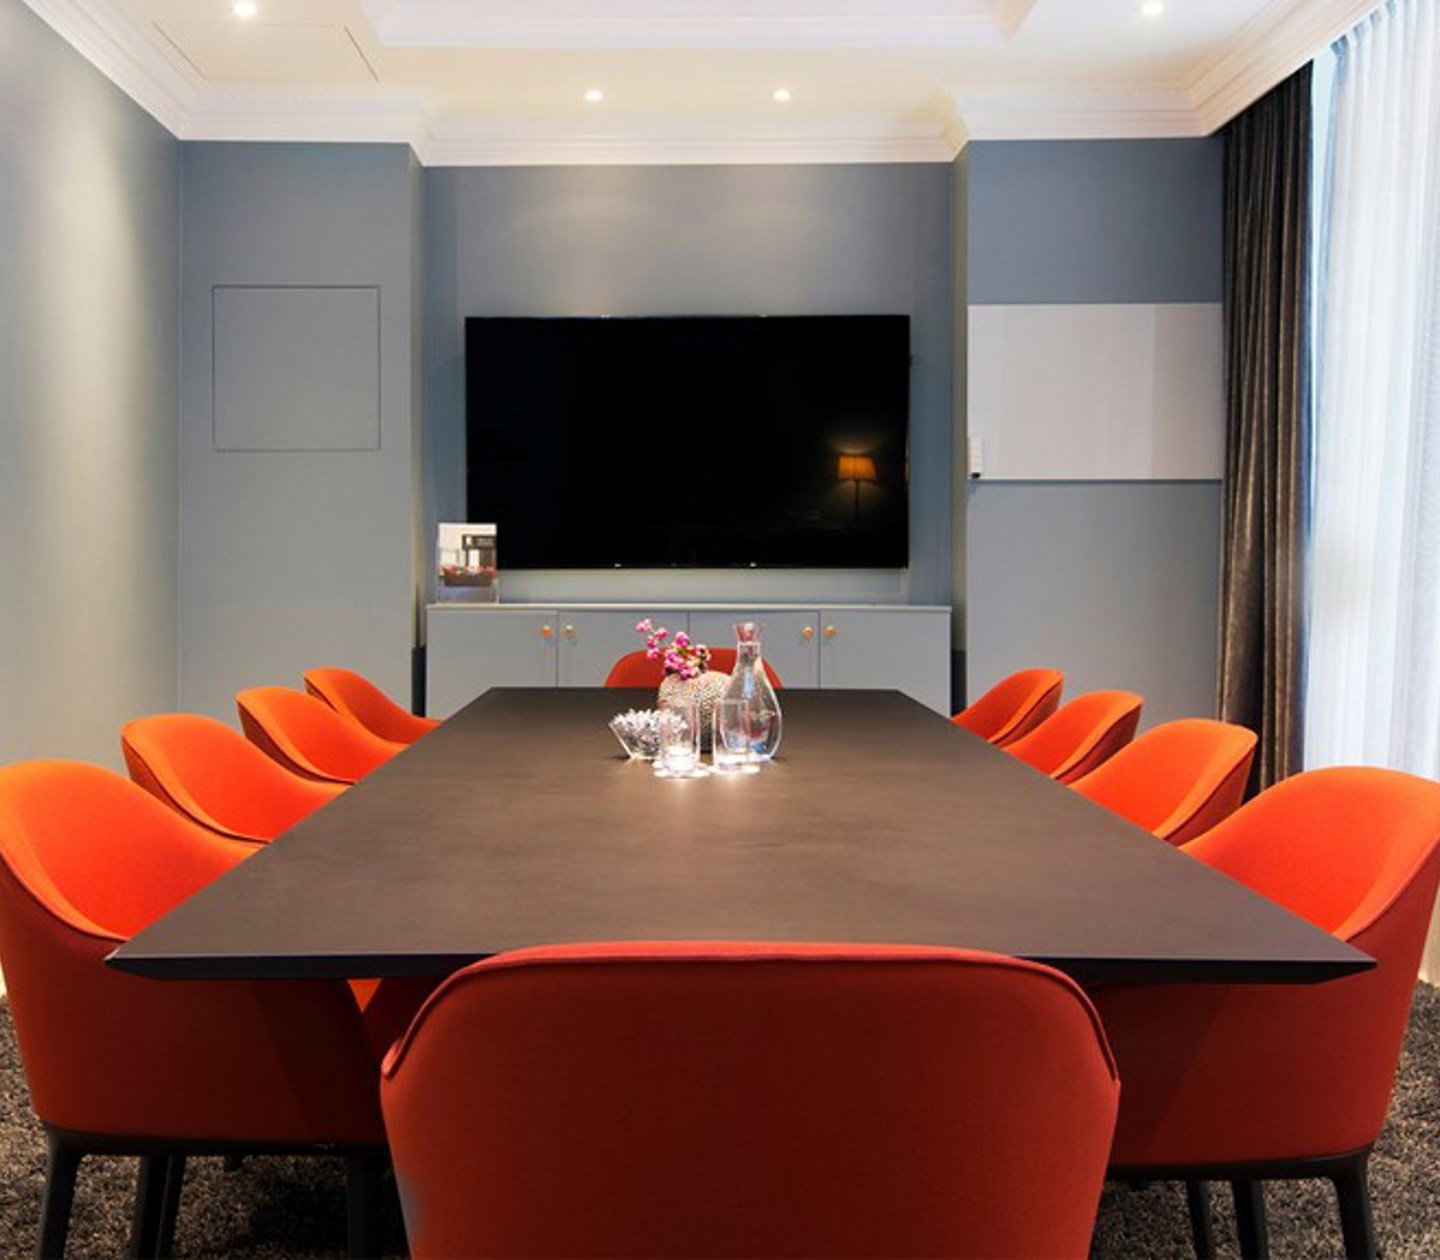 Conference room with orange chairs